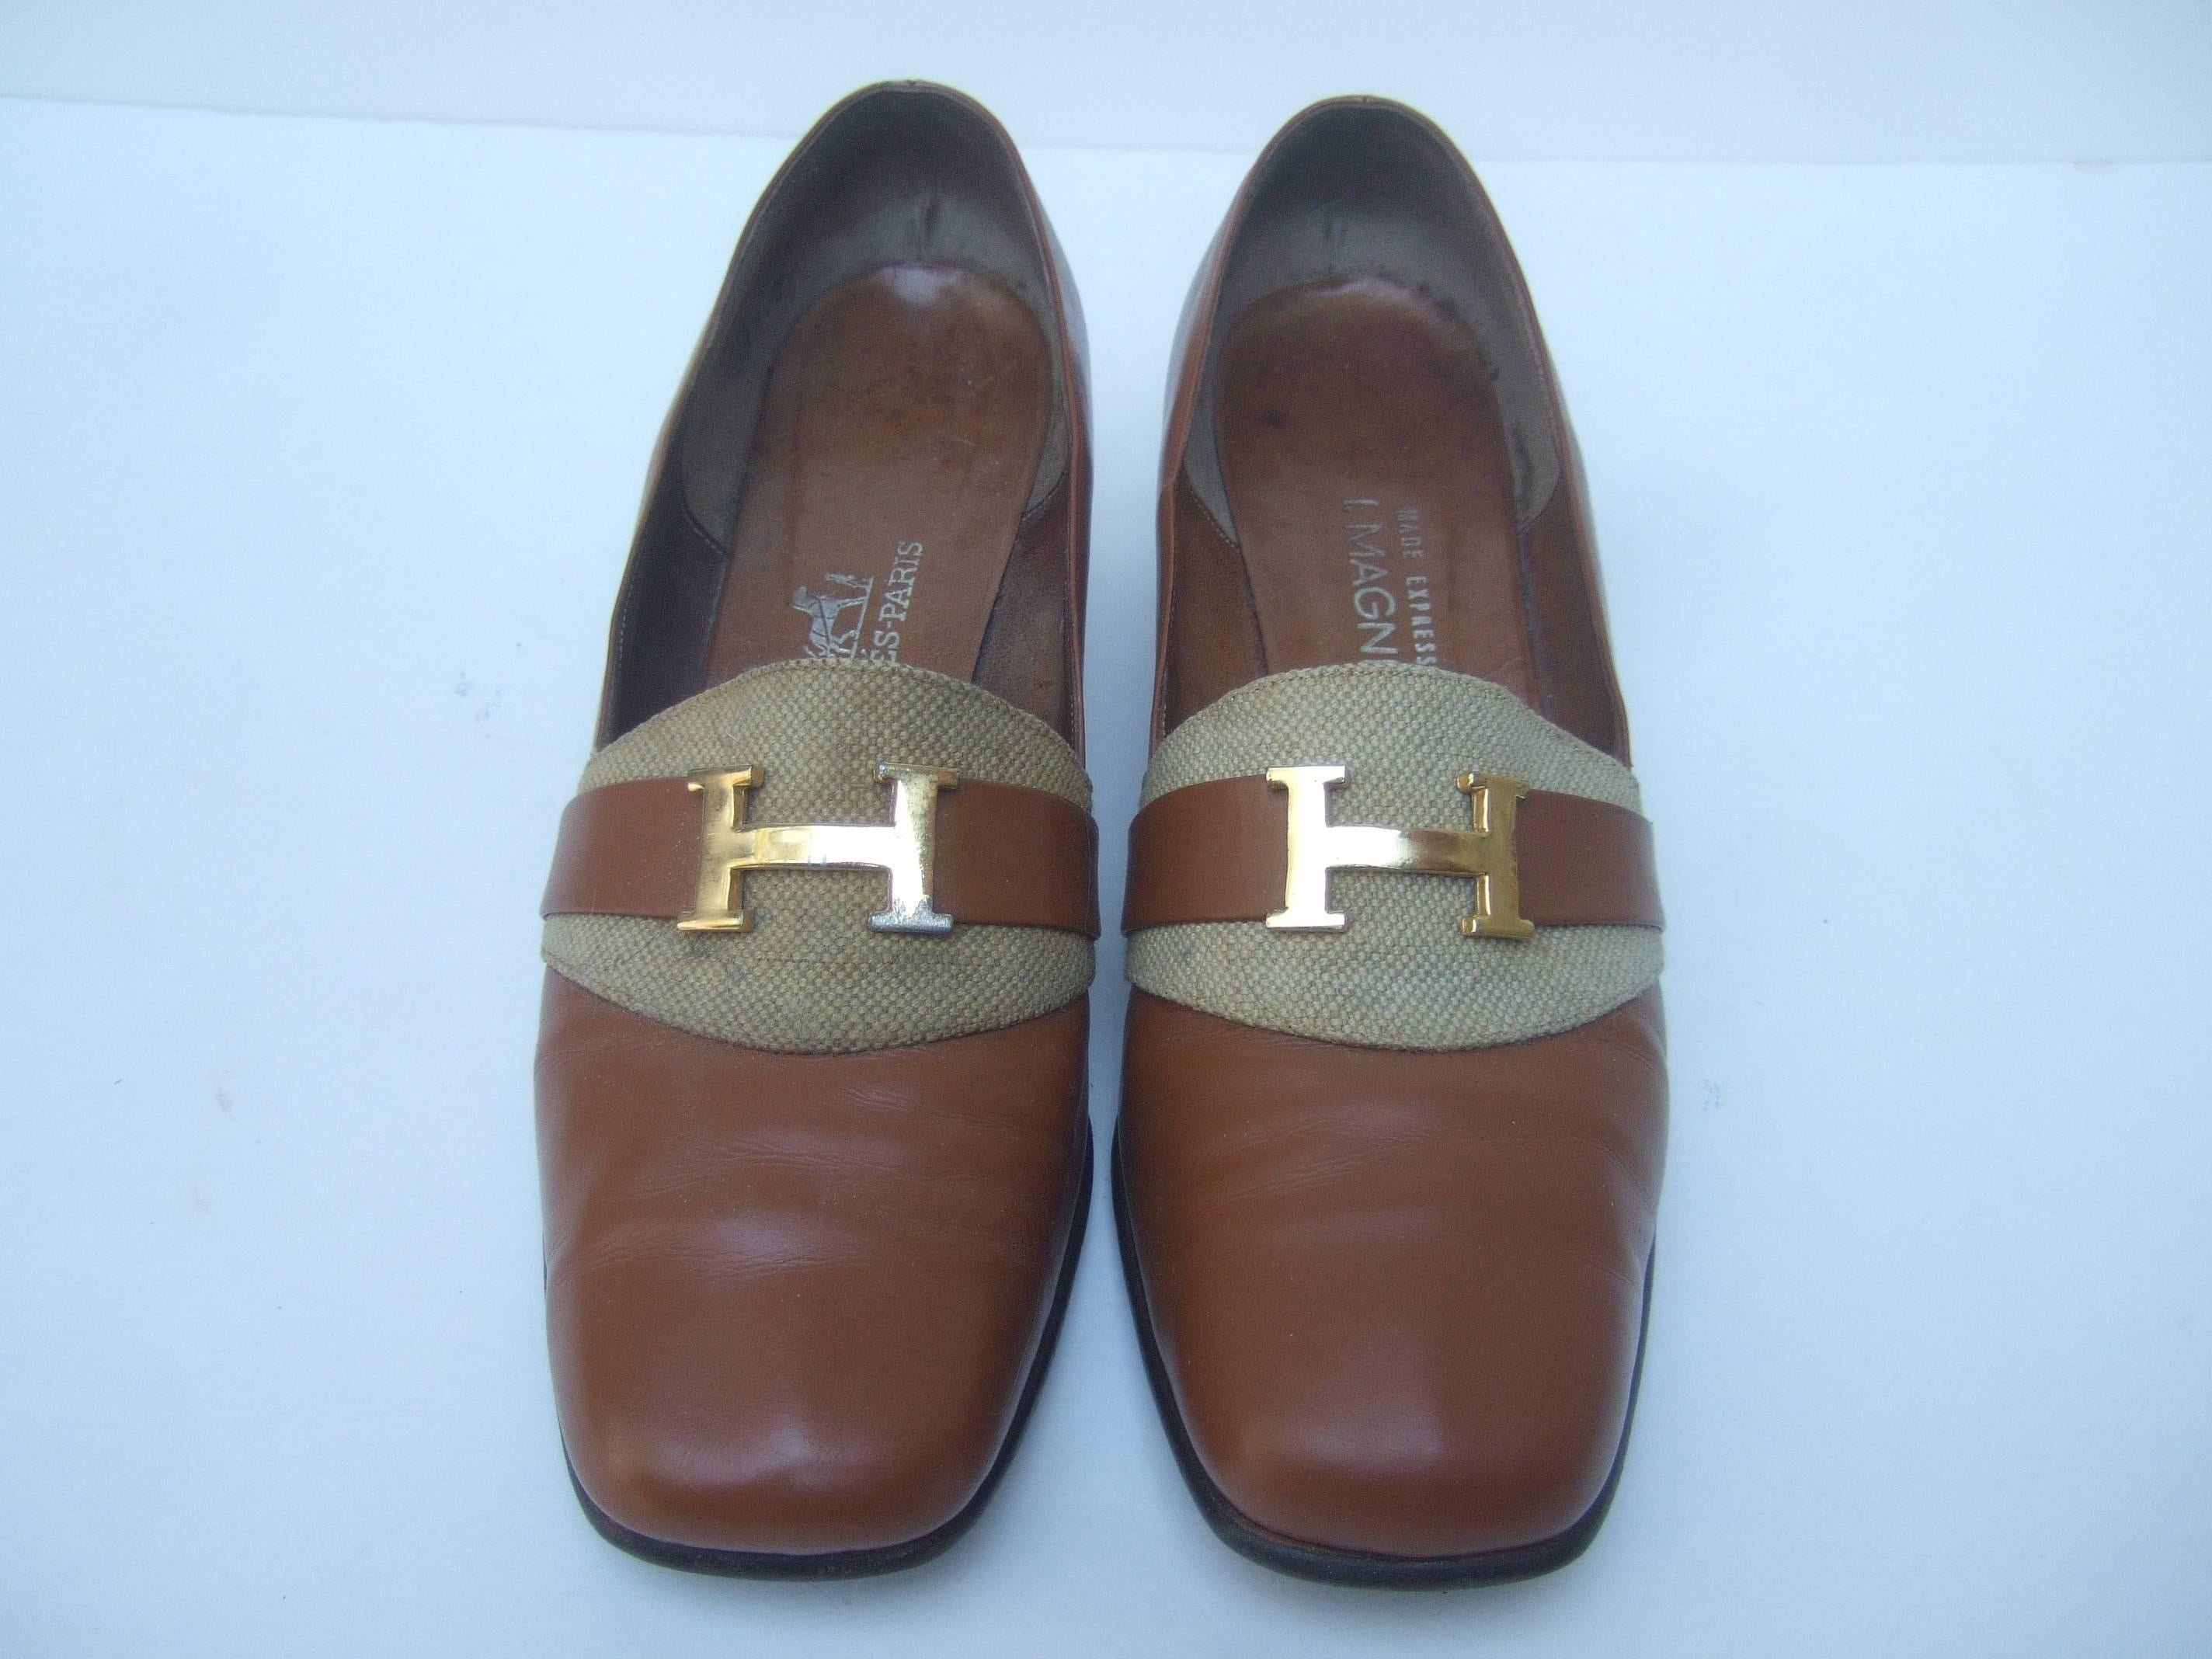 Hermes Paris Gilt H metal buckle brown leather pumps  c 1970
The classic designer pumps are covered with caramel 
brown leather. Underneath the H initials is a tan burlap
cloth panel 

The stylish retro pumps make a chic timeless